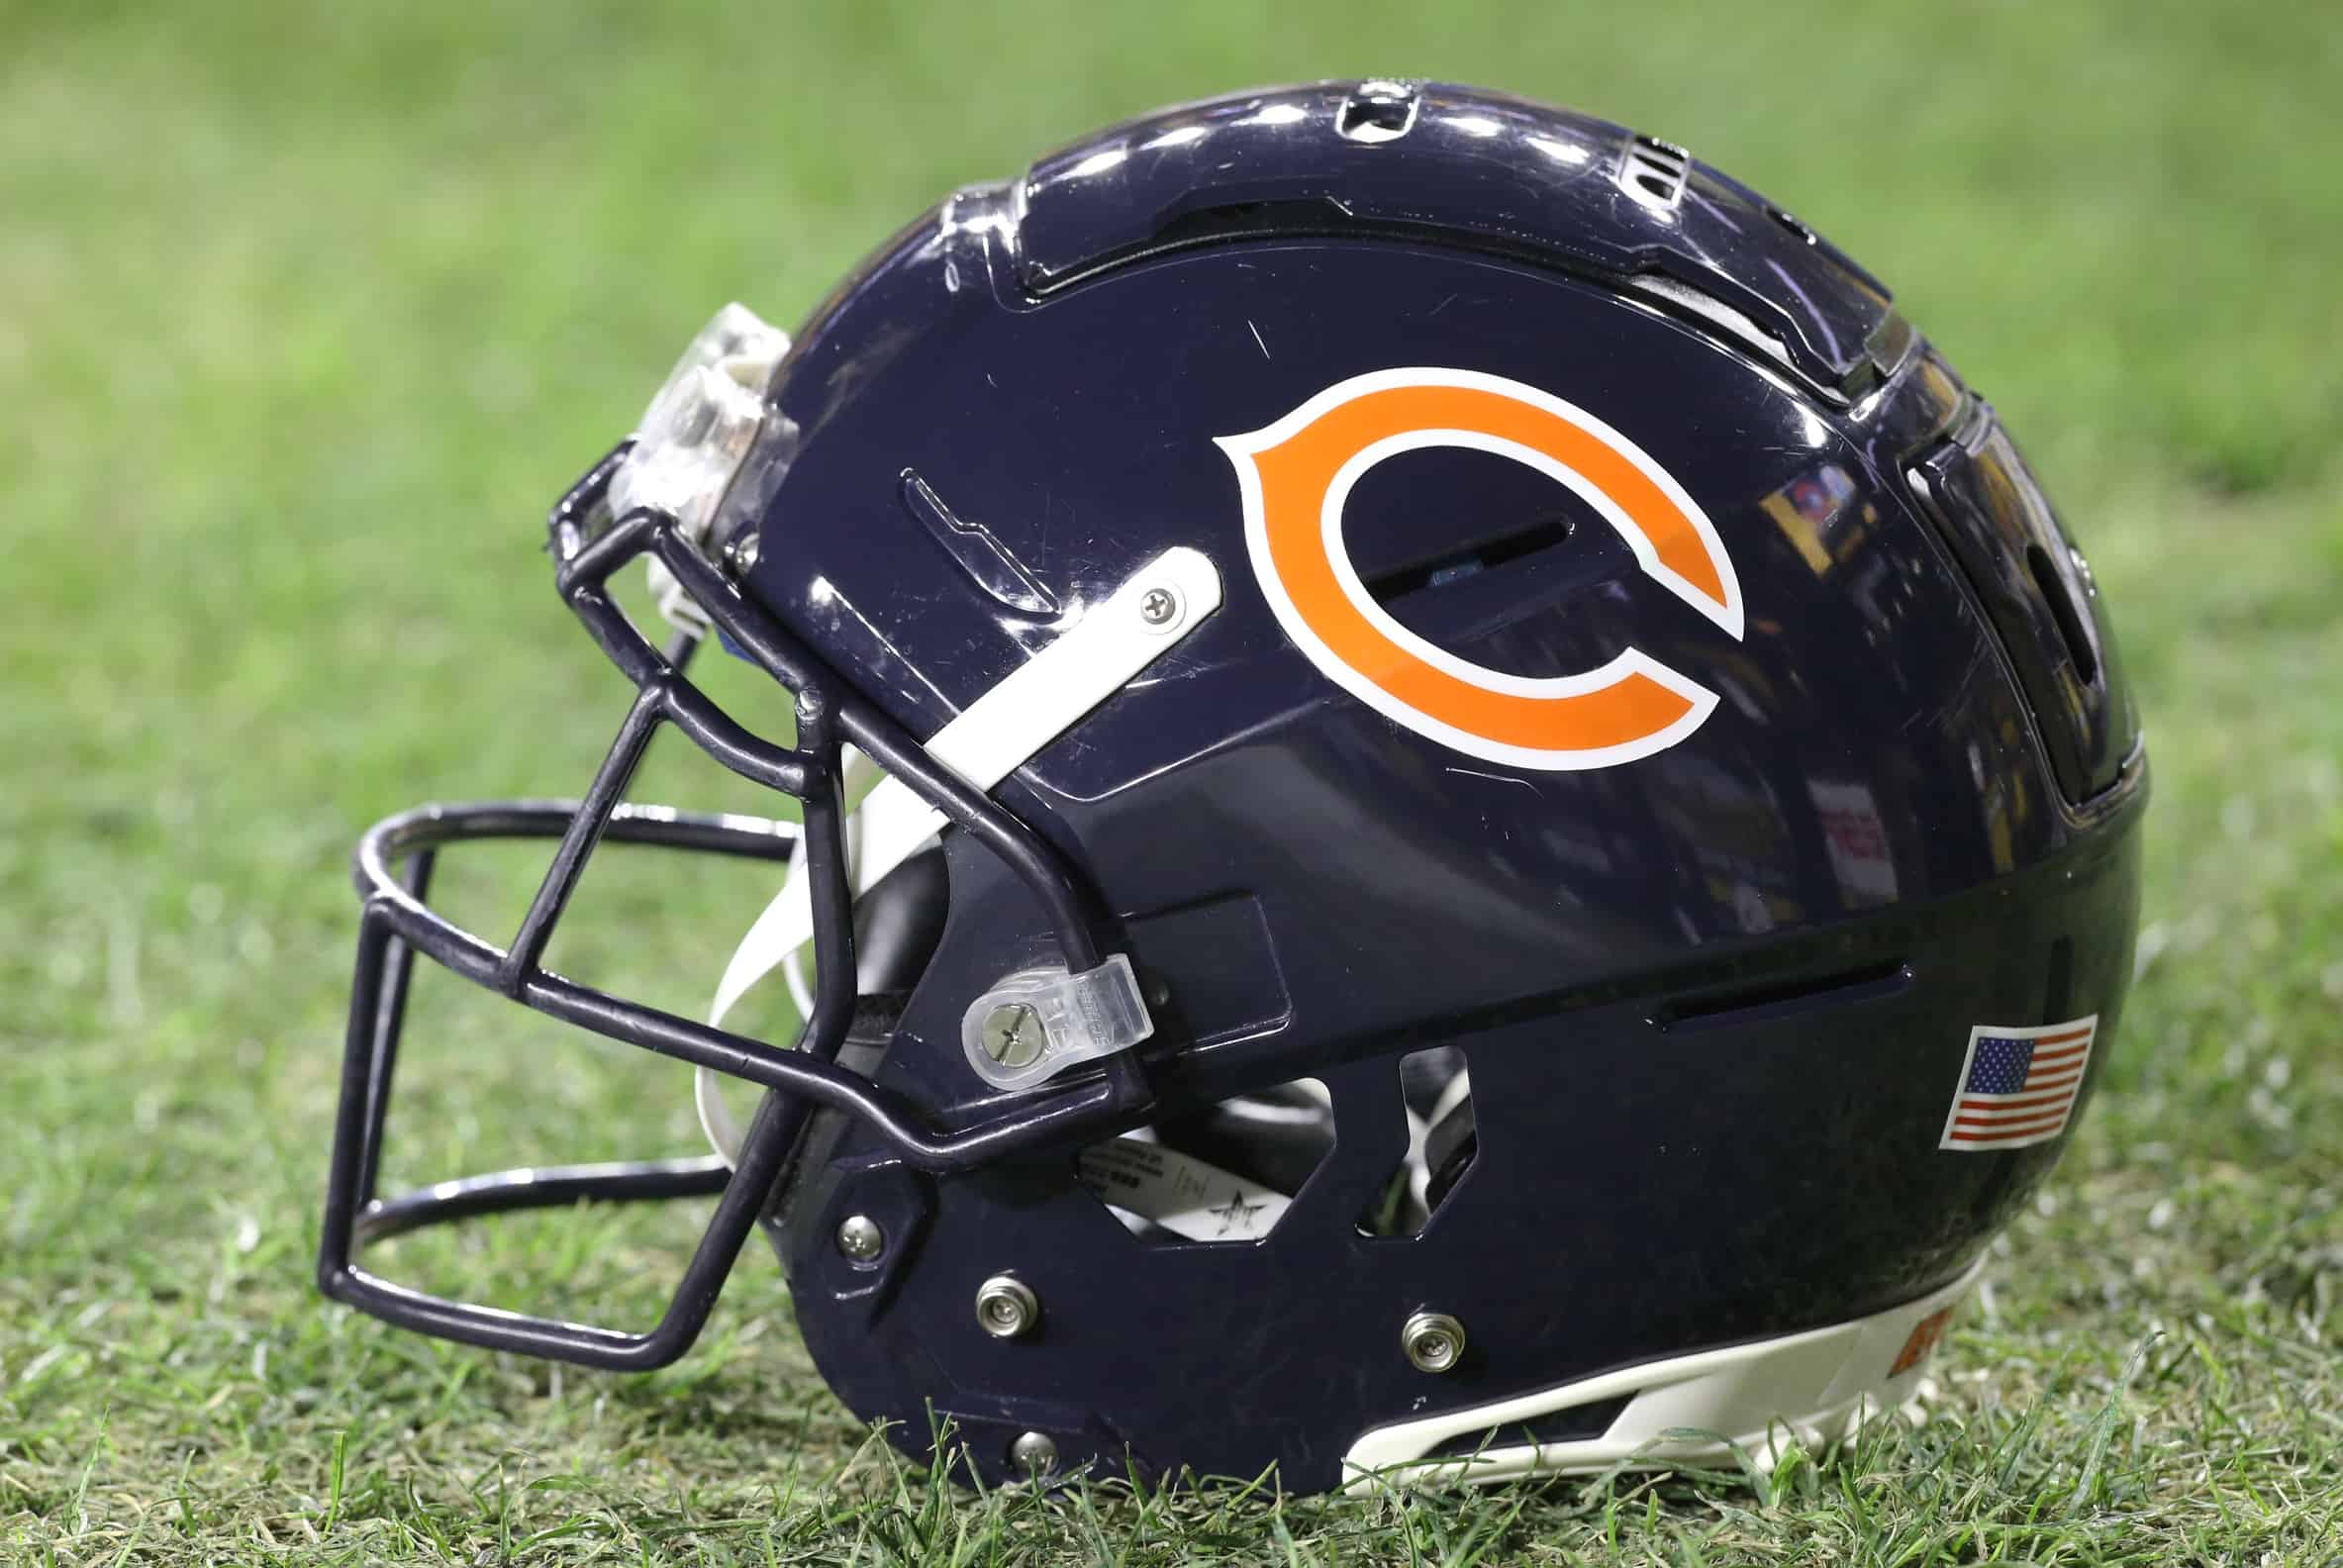 How to watch, listen to Chicago Bears at Seattle Seahawks 2022